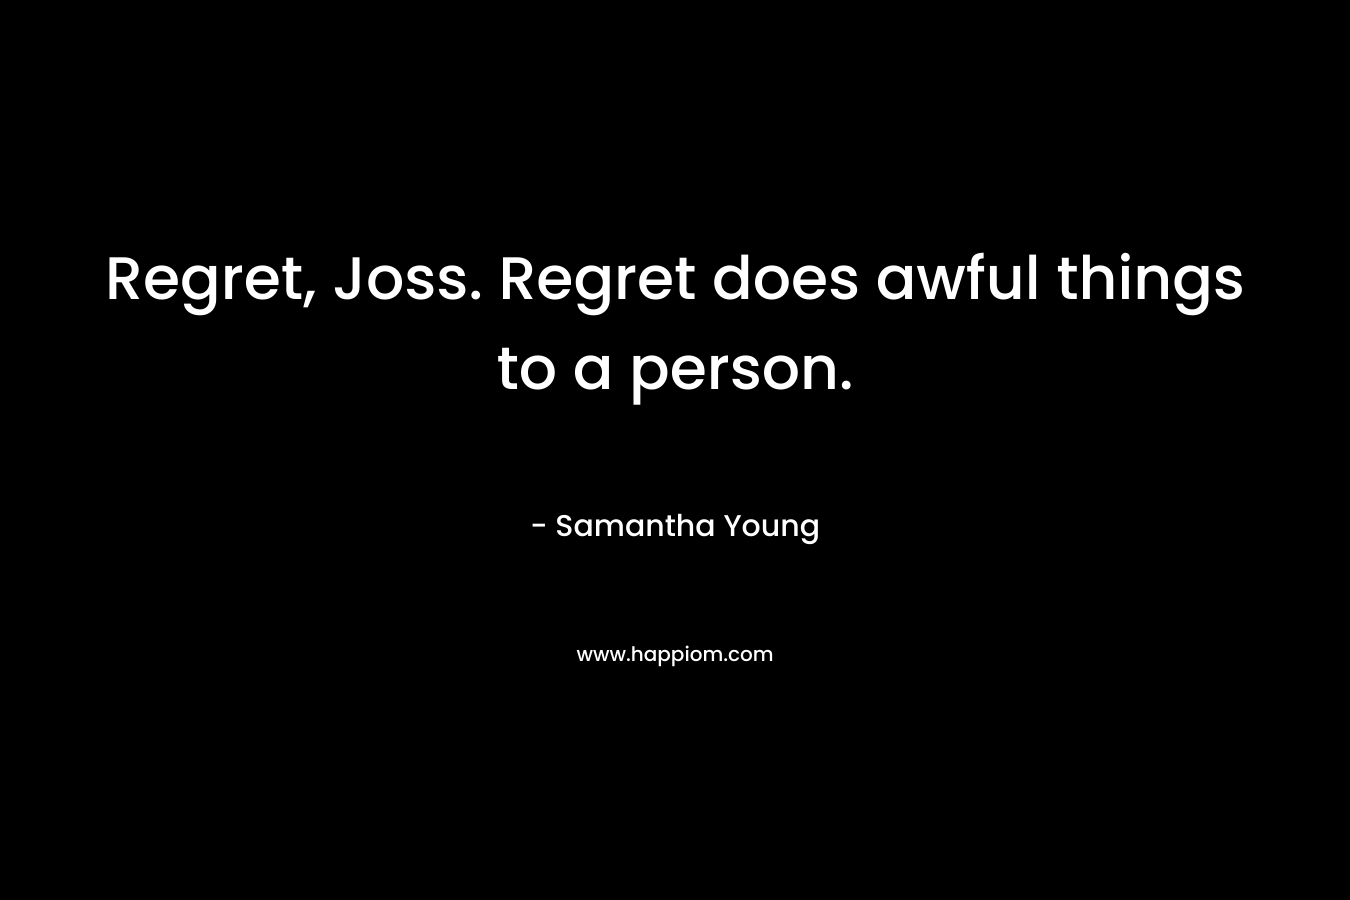 Regret, Joss. Regret does awful things to a person.